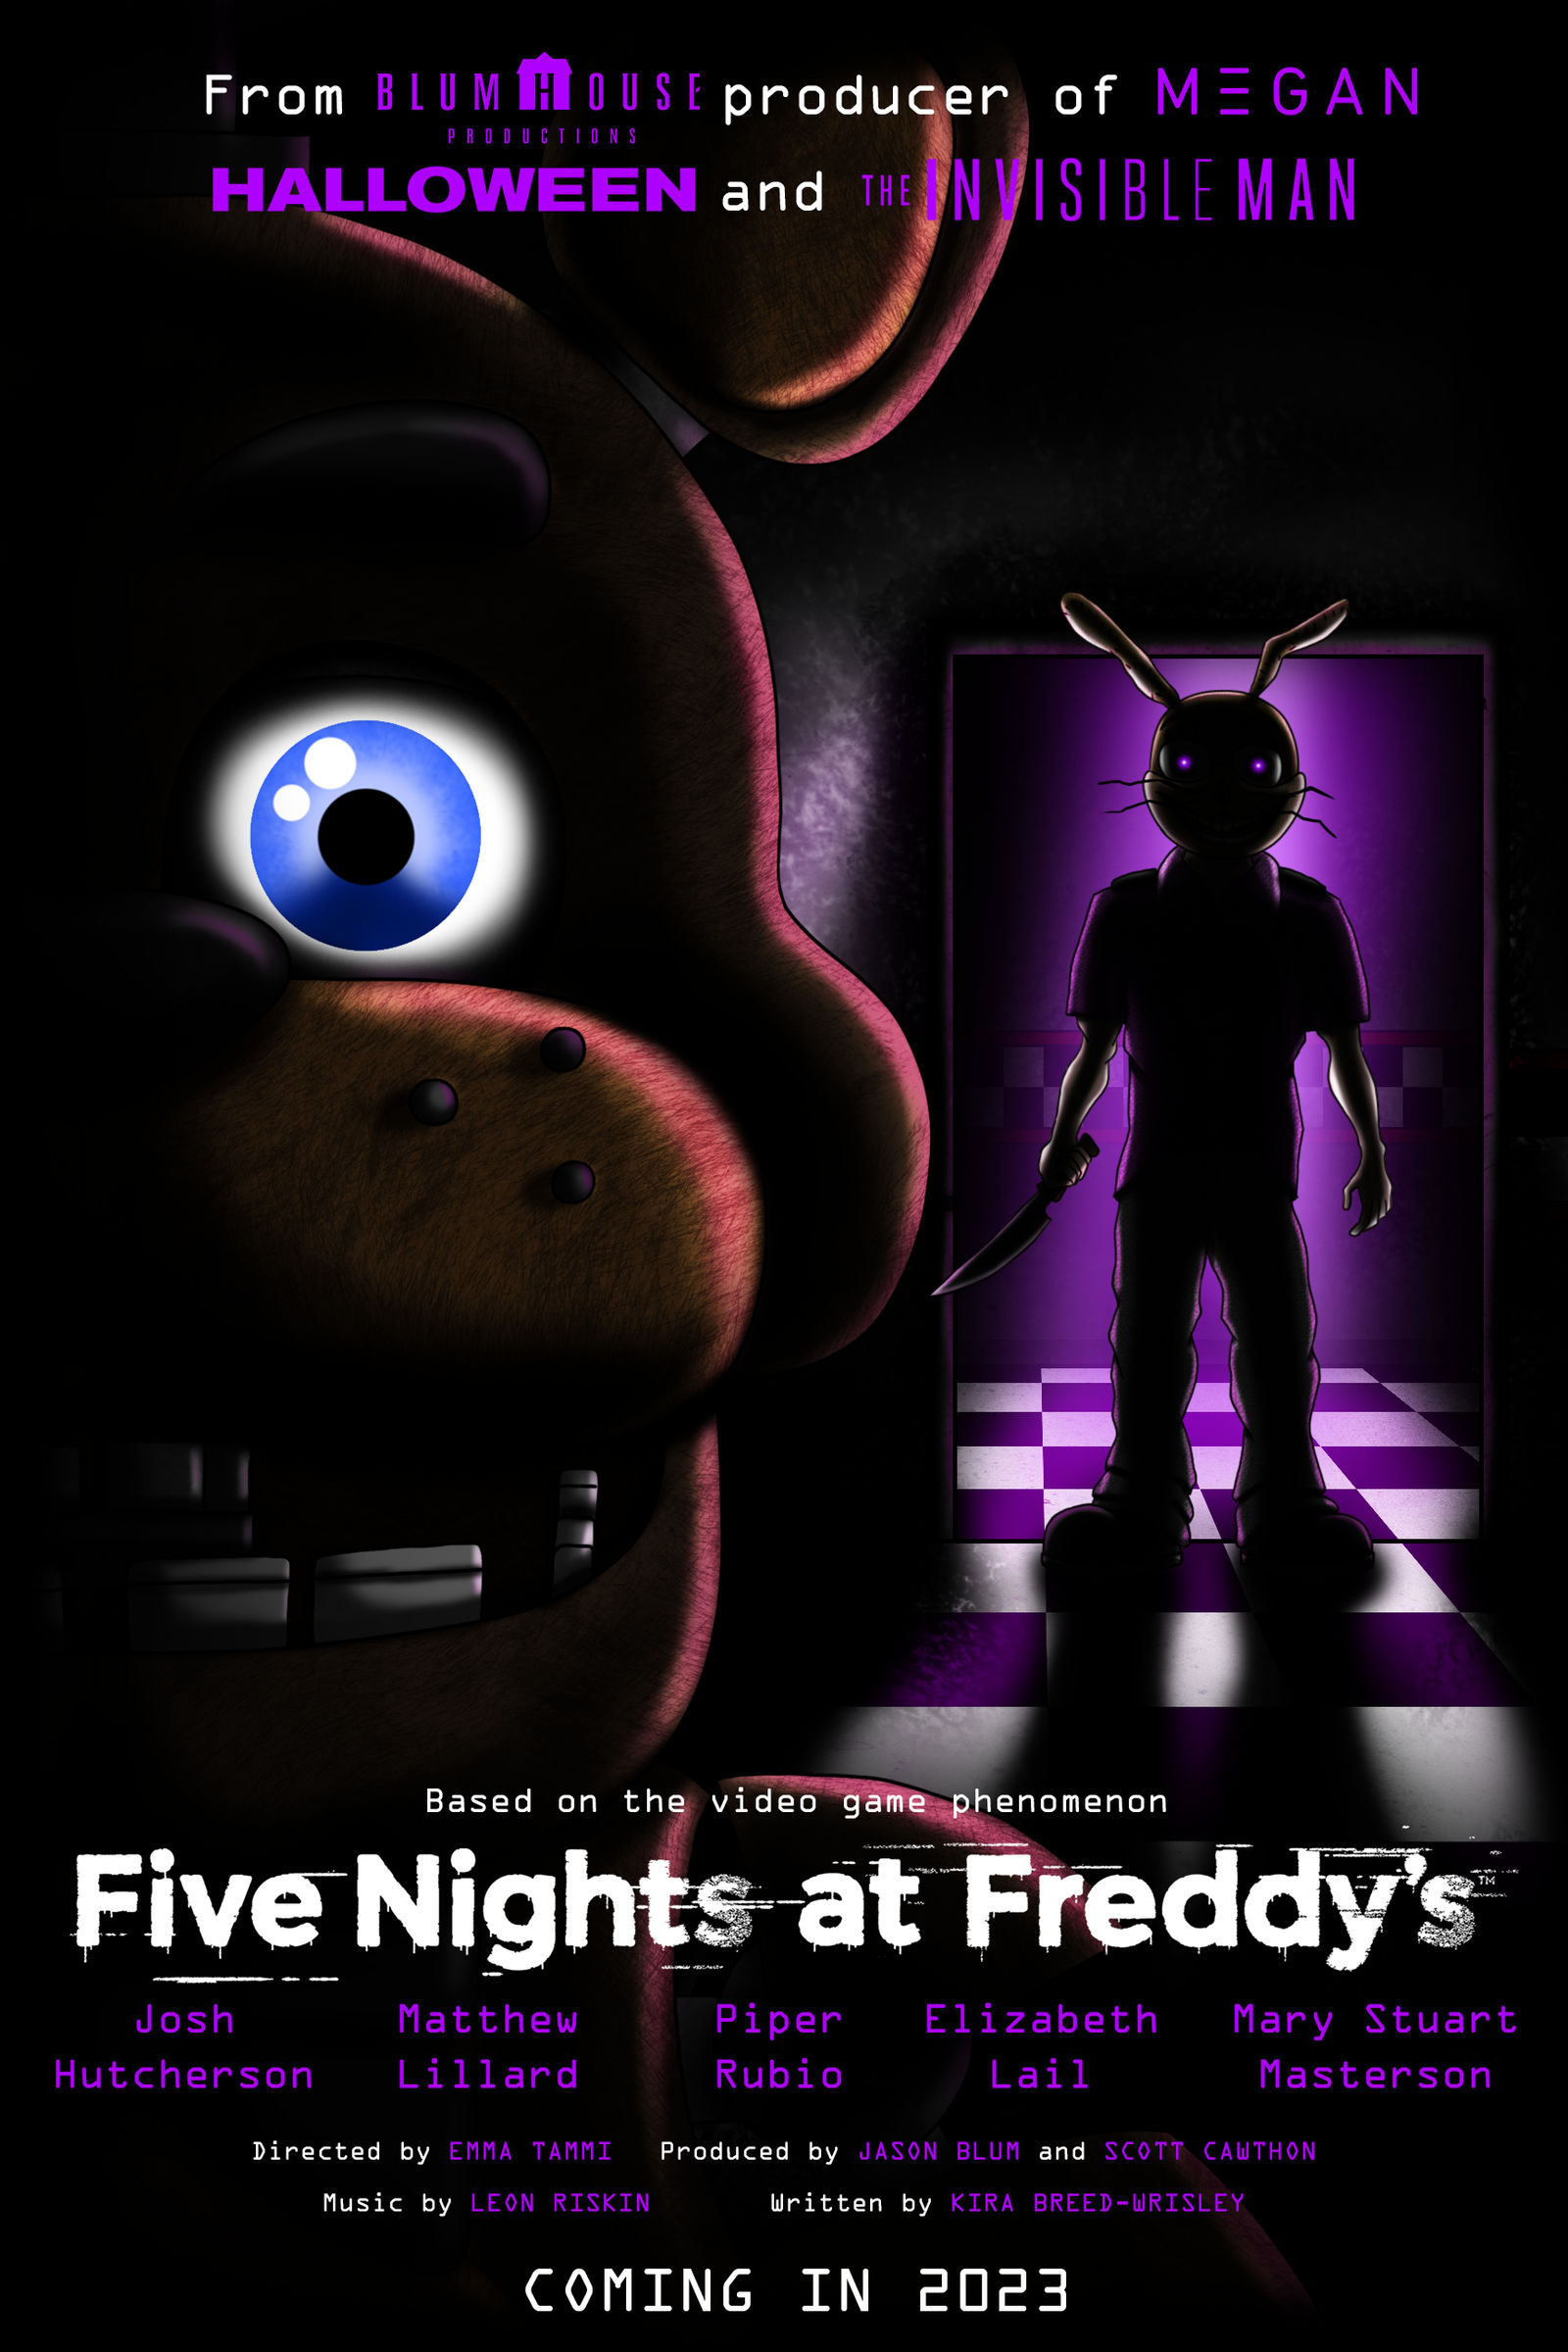 SECURITY BREACH POSTER  Five nights at freddy's, Fnaf, Five night